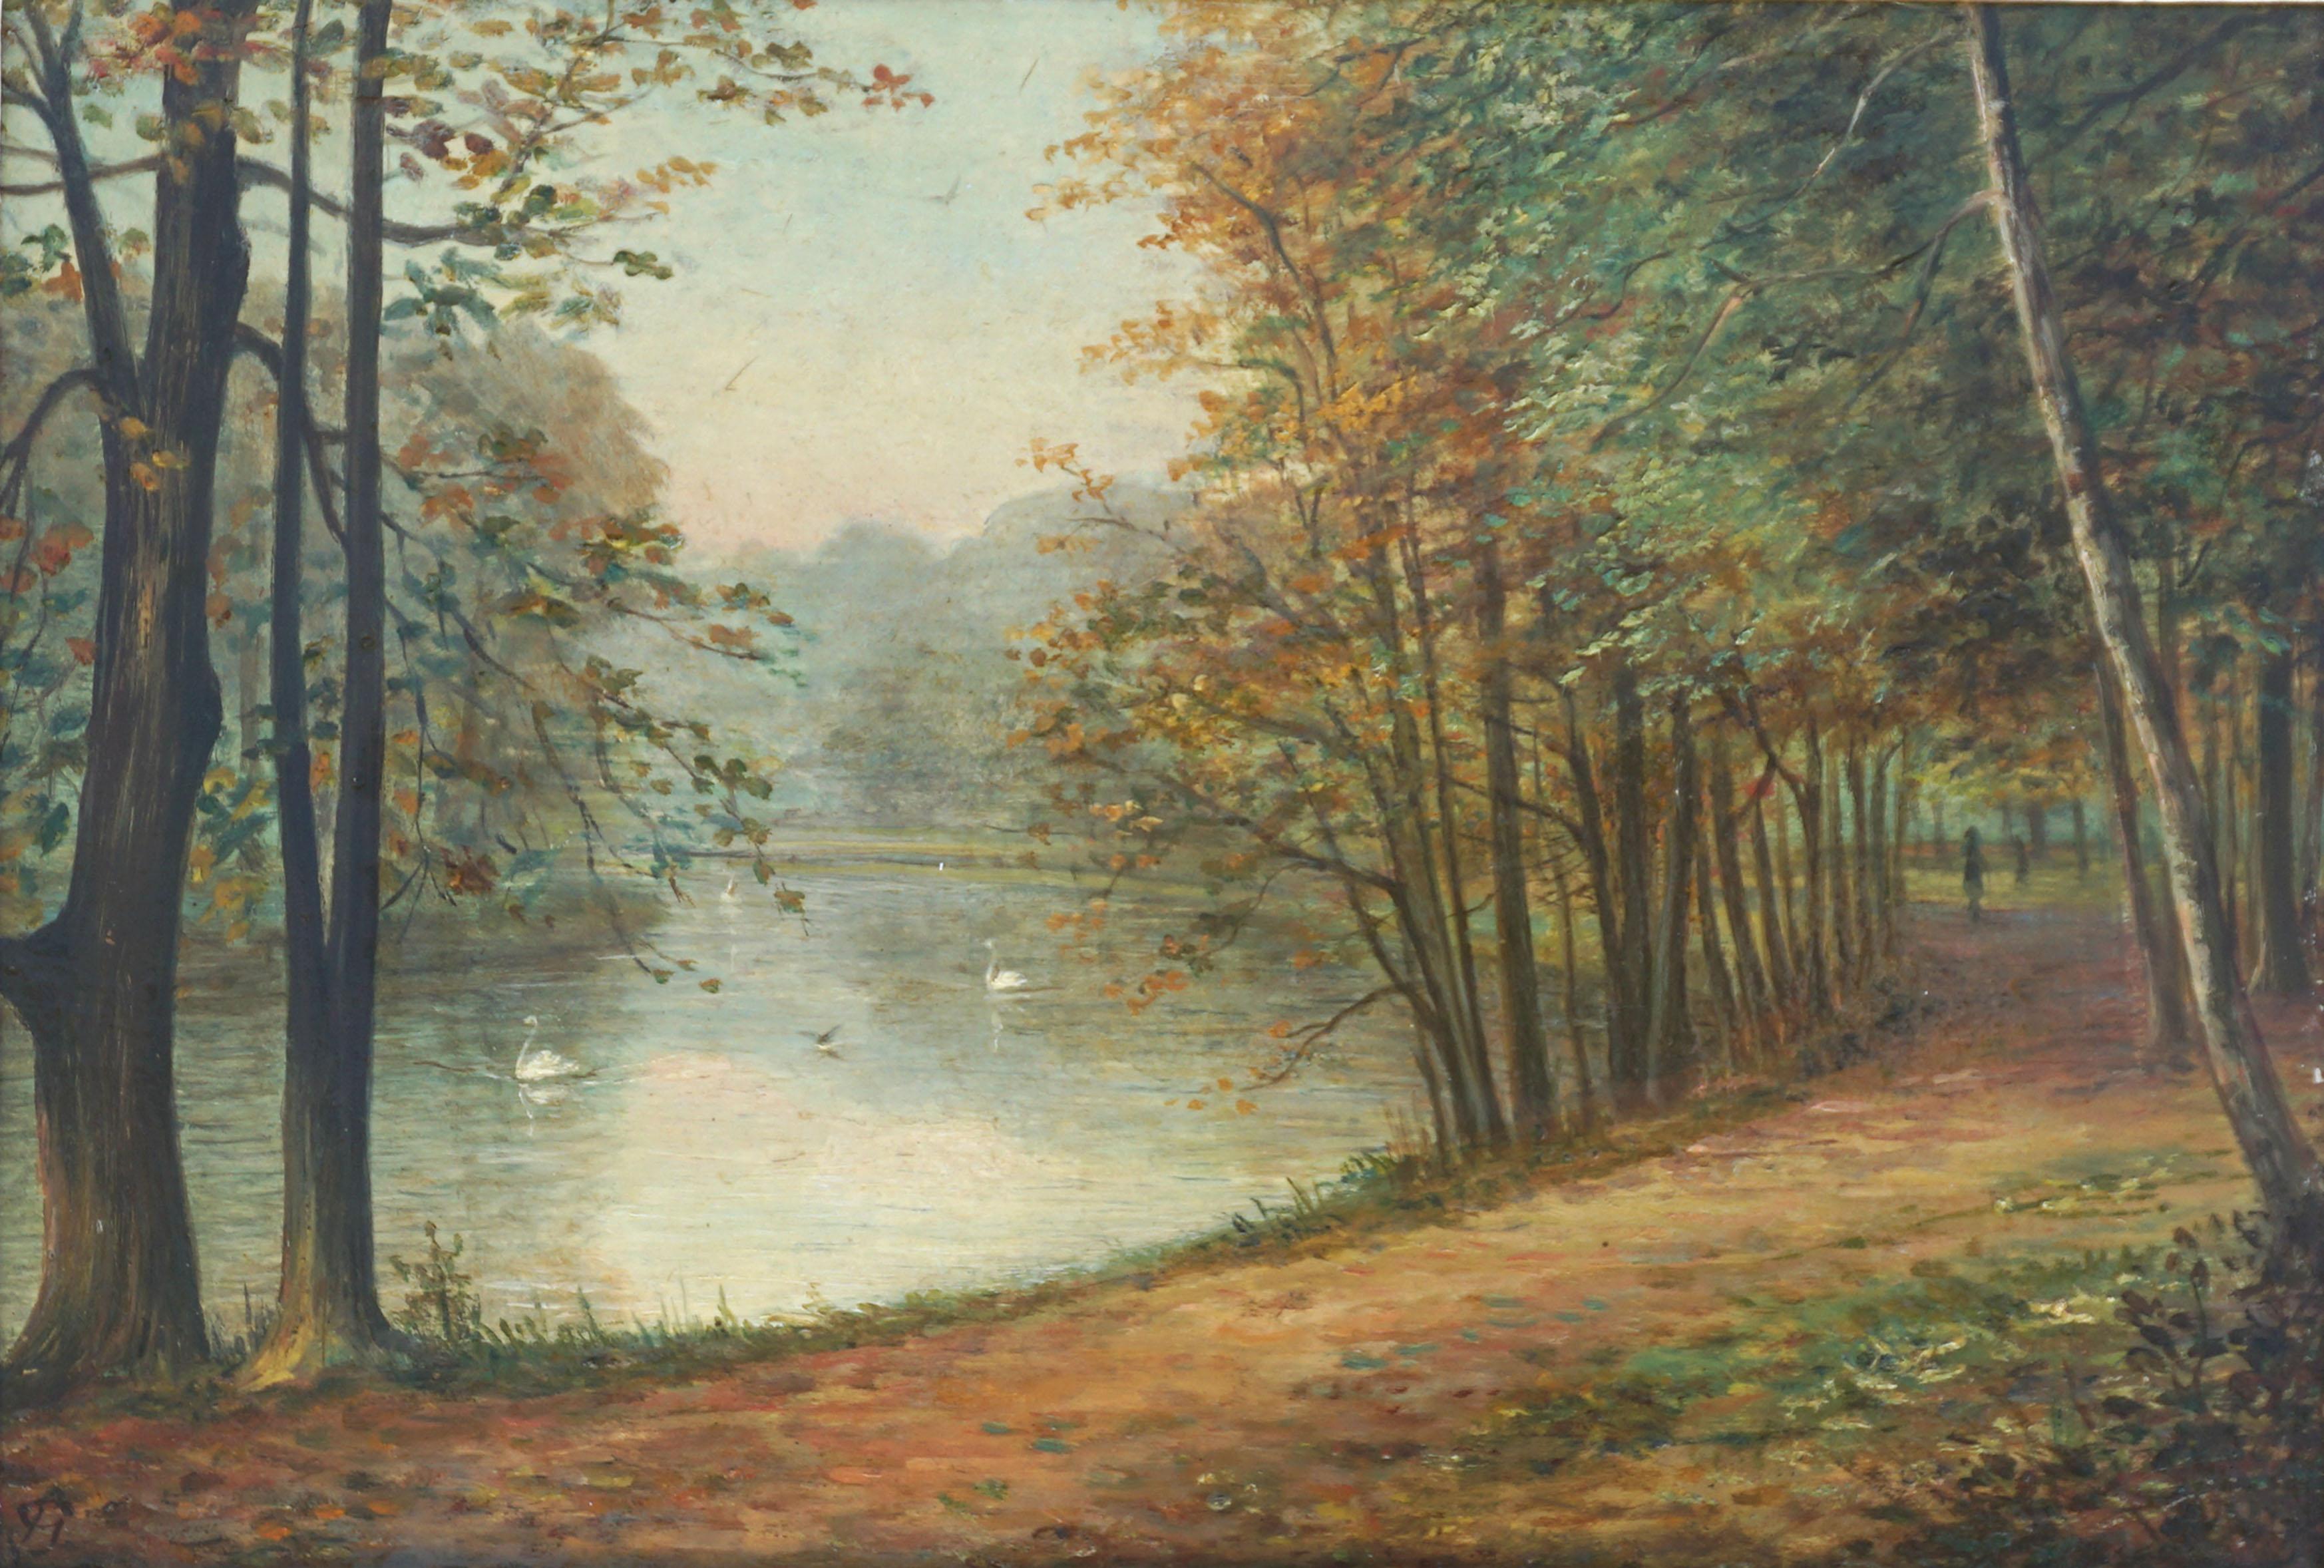 English School Swans in Park - Turn of the Century Landscape - Painting by Unknown